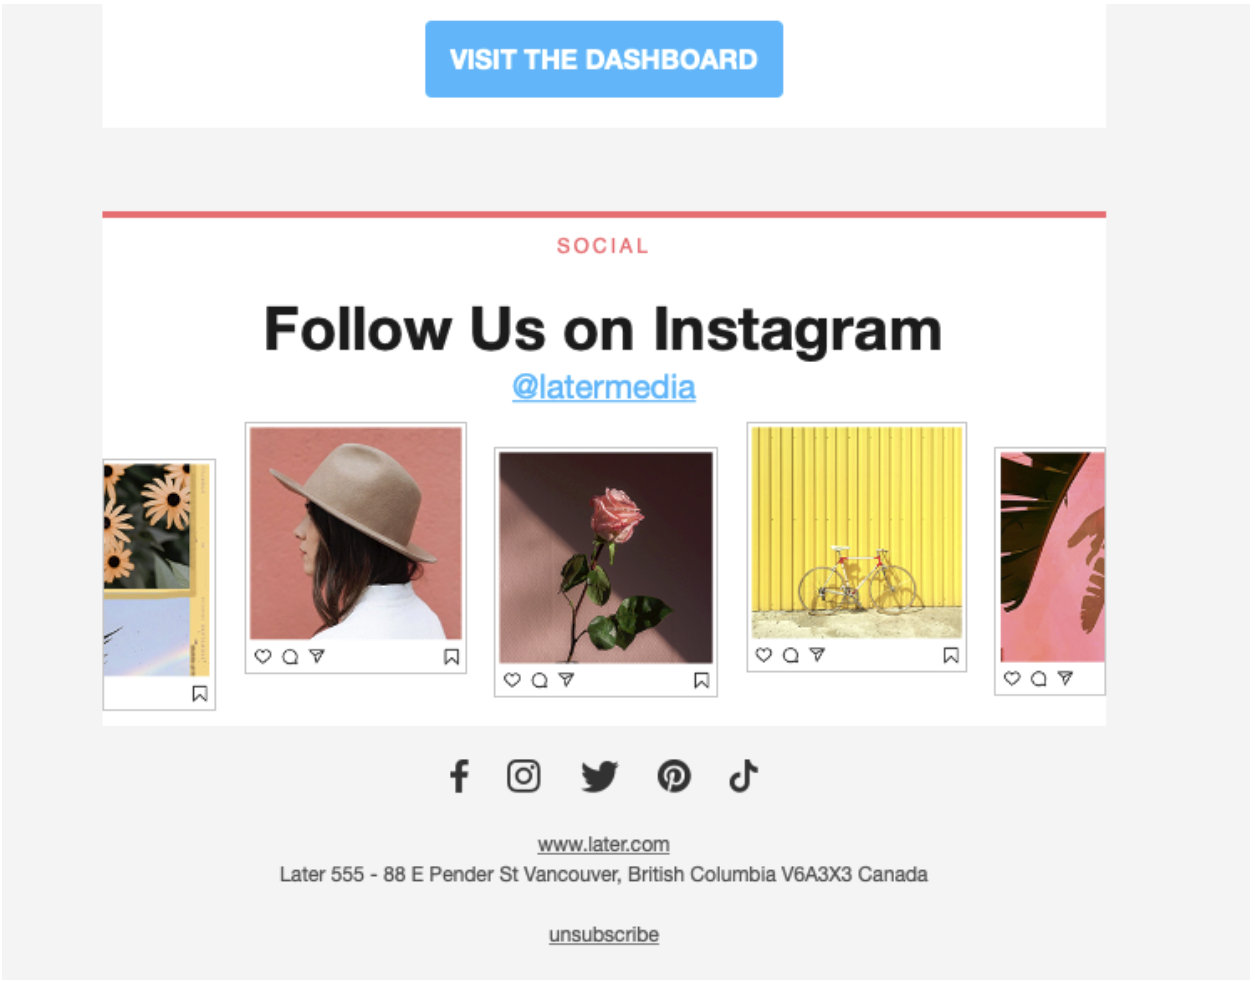 Improve Your Email Deliverability by adding a follow on IG CTA